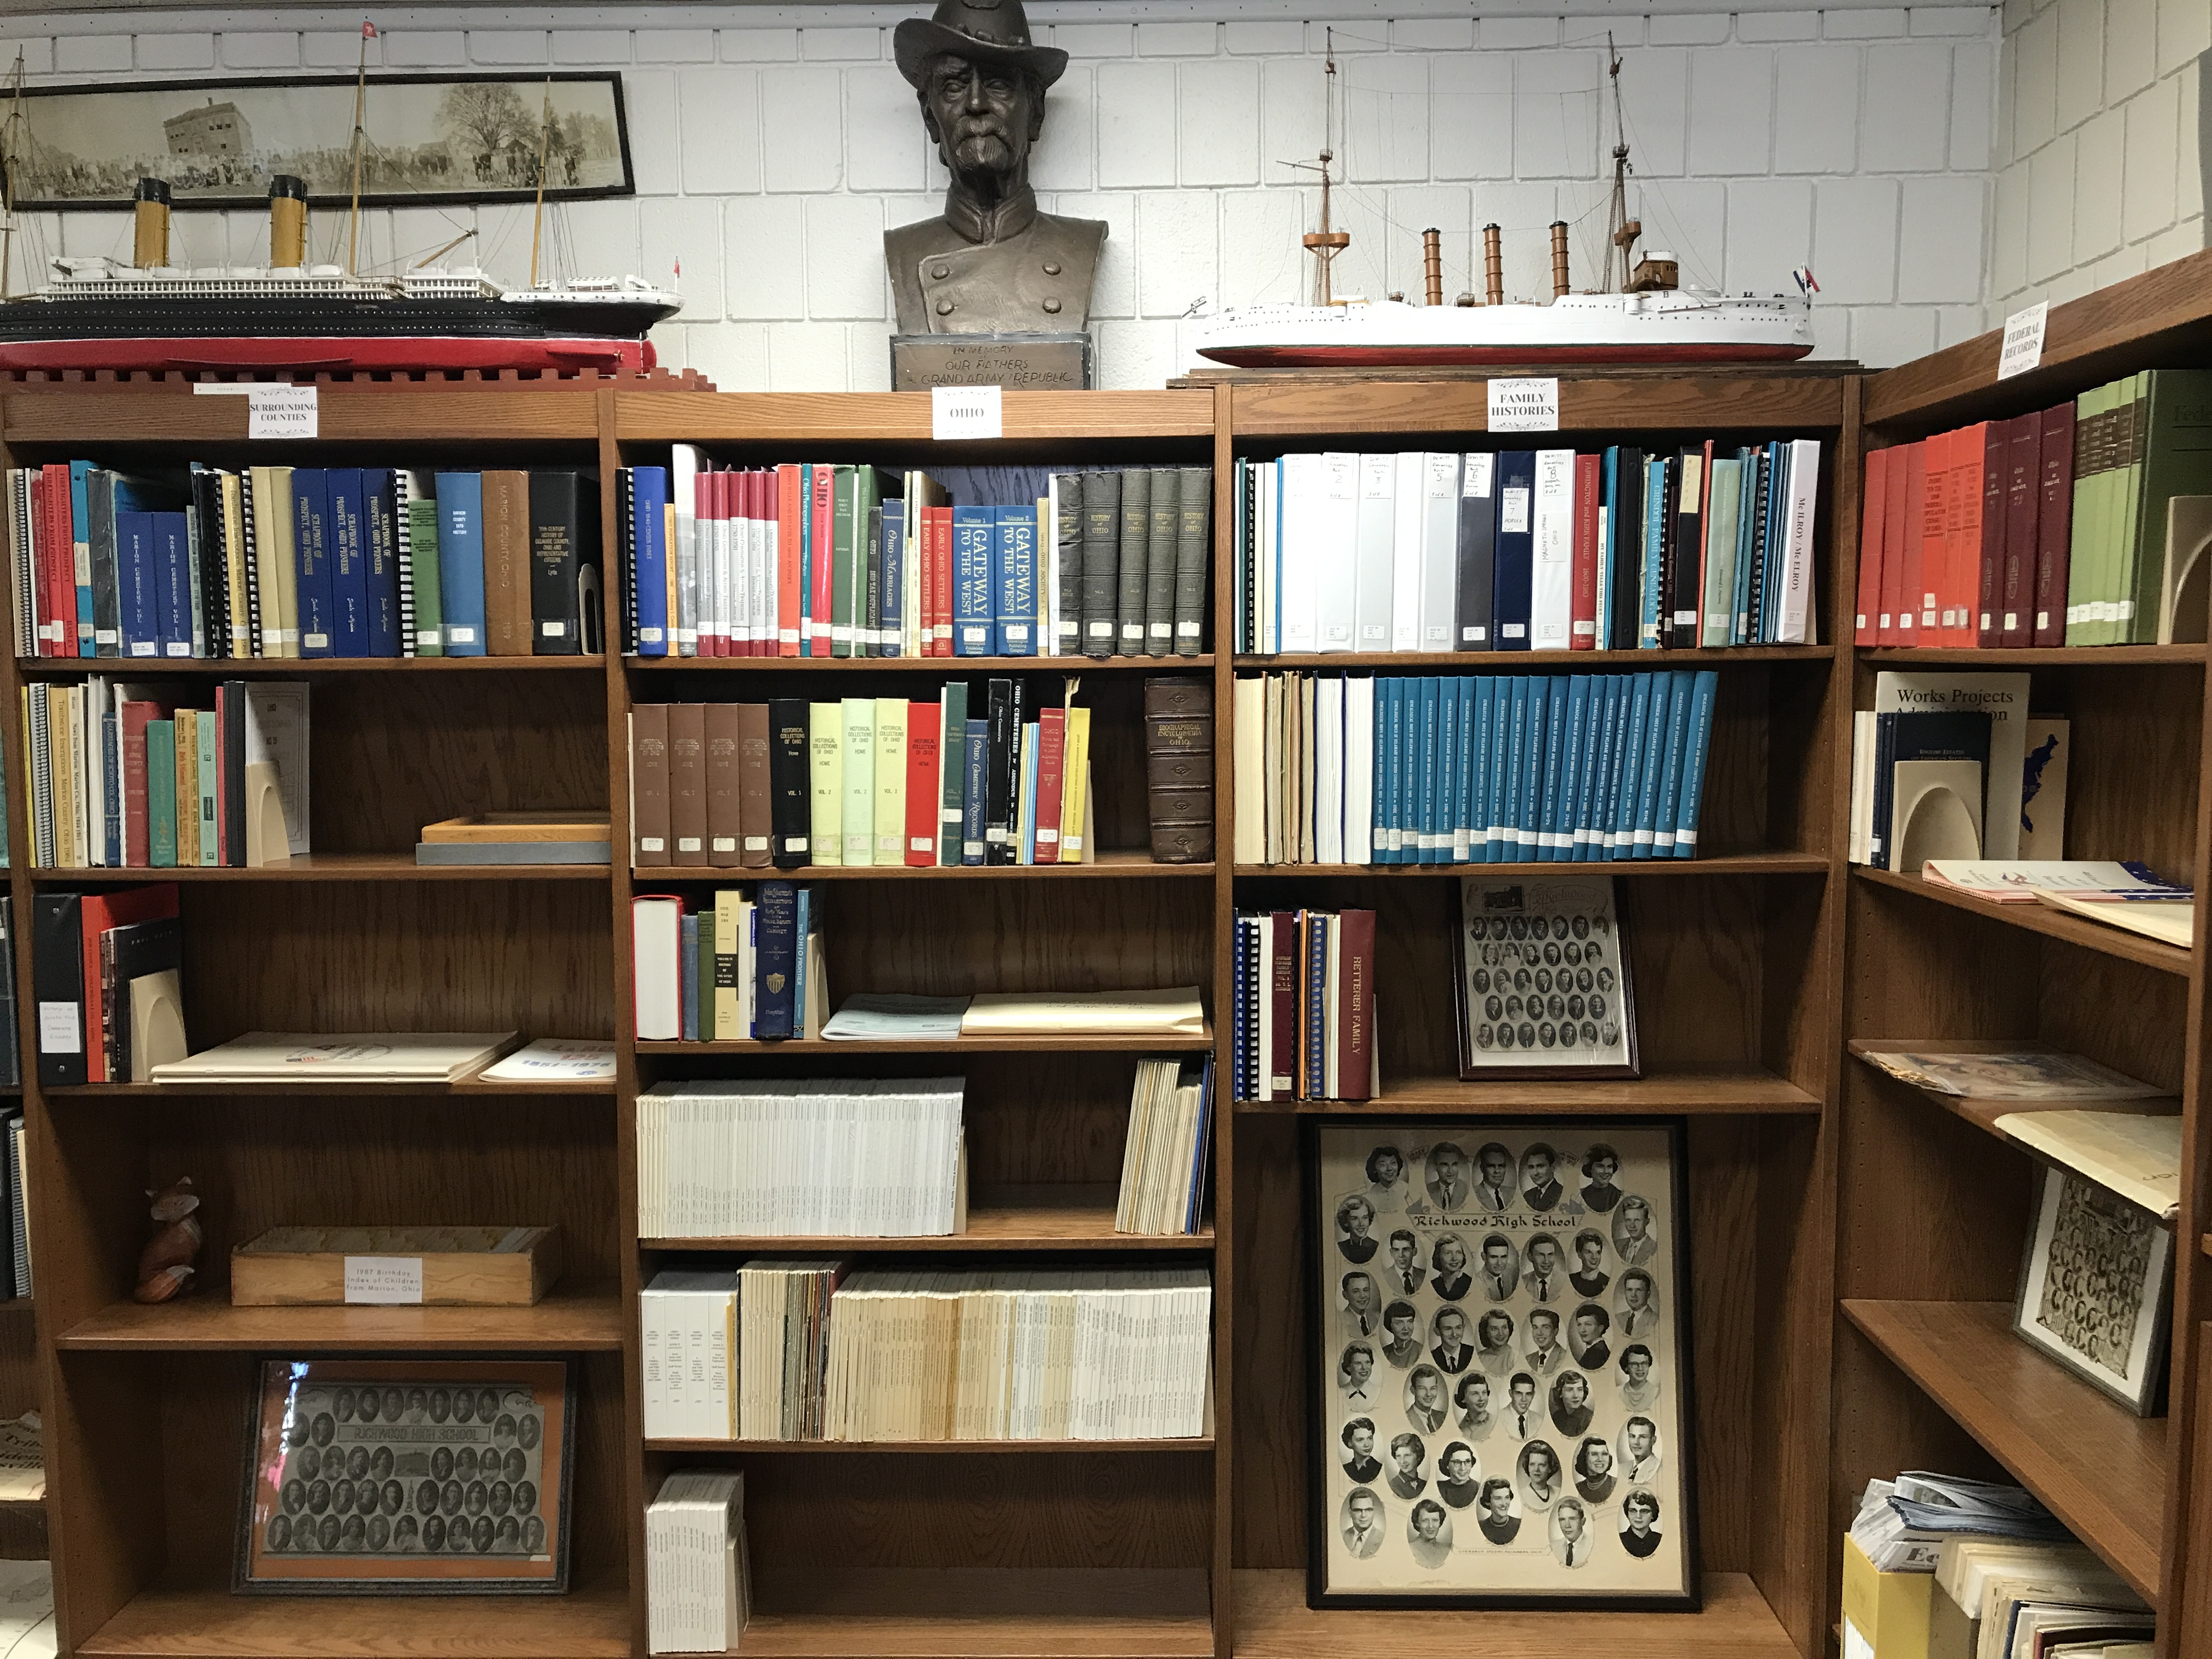 Shelves in the history room